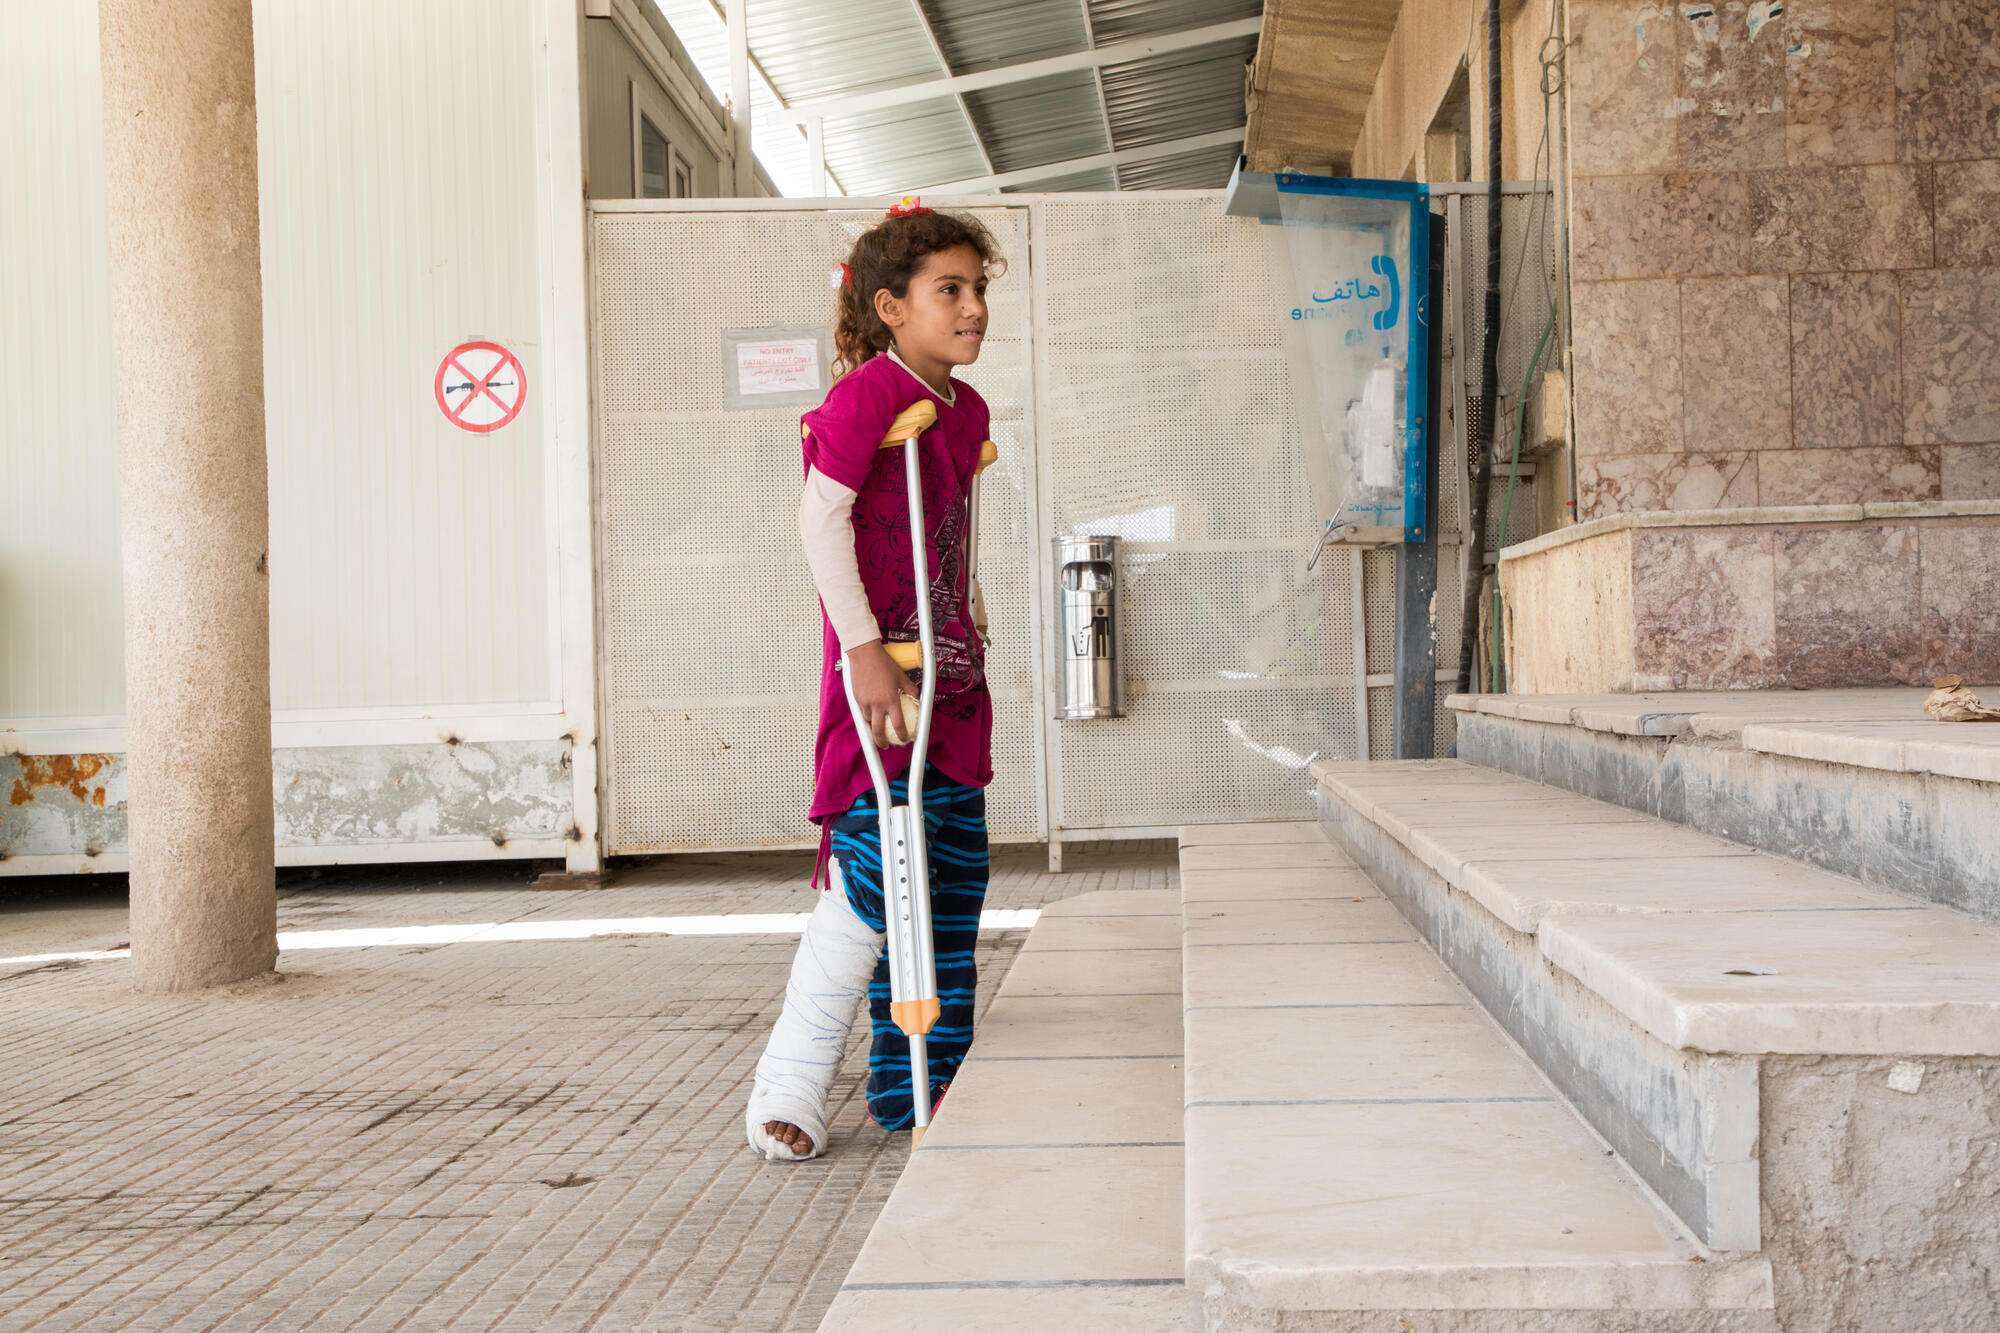 April 2018. As relative calm returns to Hassakeh and Raqqa provinces, people previously displaced by heavy fighting begin returning home, to areas littered with landmines and unexploded remnants of war, and where the health infrastructure has been largely destroyed. MSF teams in Hassakeh and Raqqa treat hundreds of patients wounded by landmines, booby traps and explosive ordnance. ©Louise Annaud/MSF